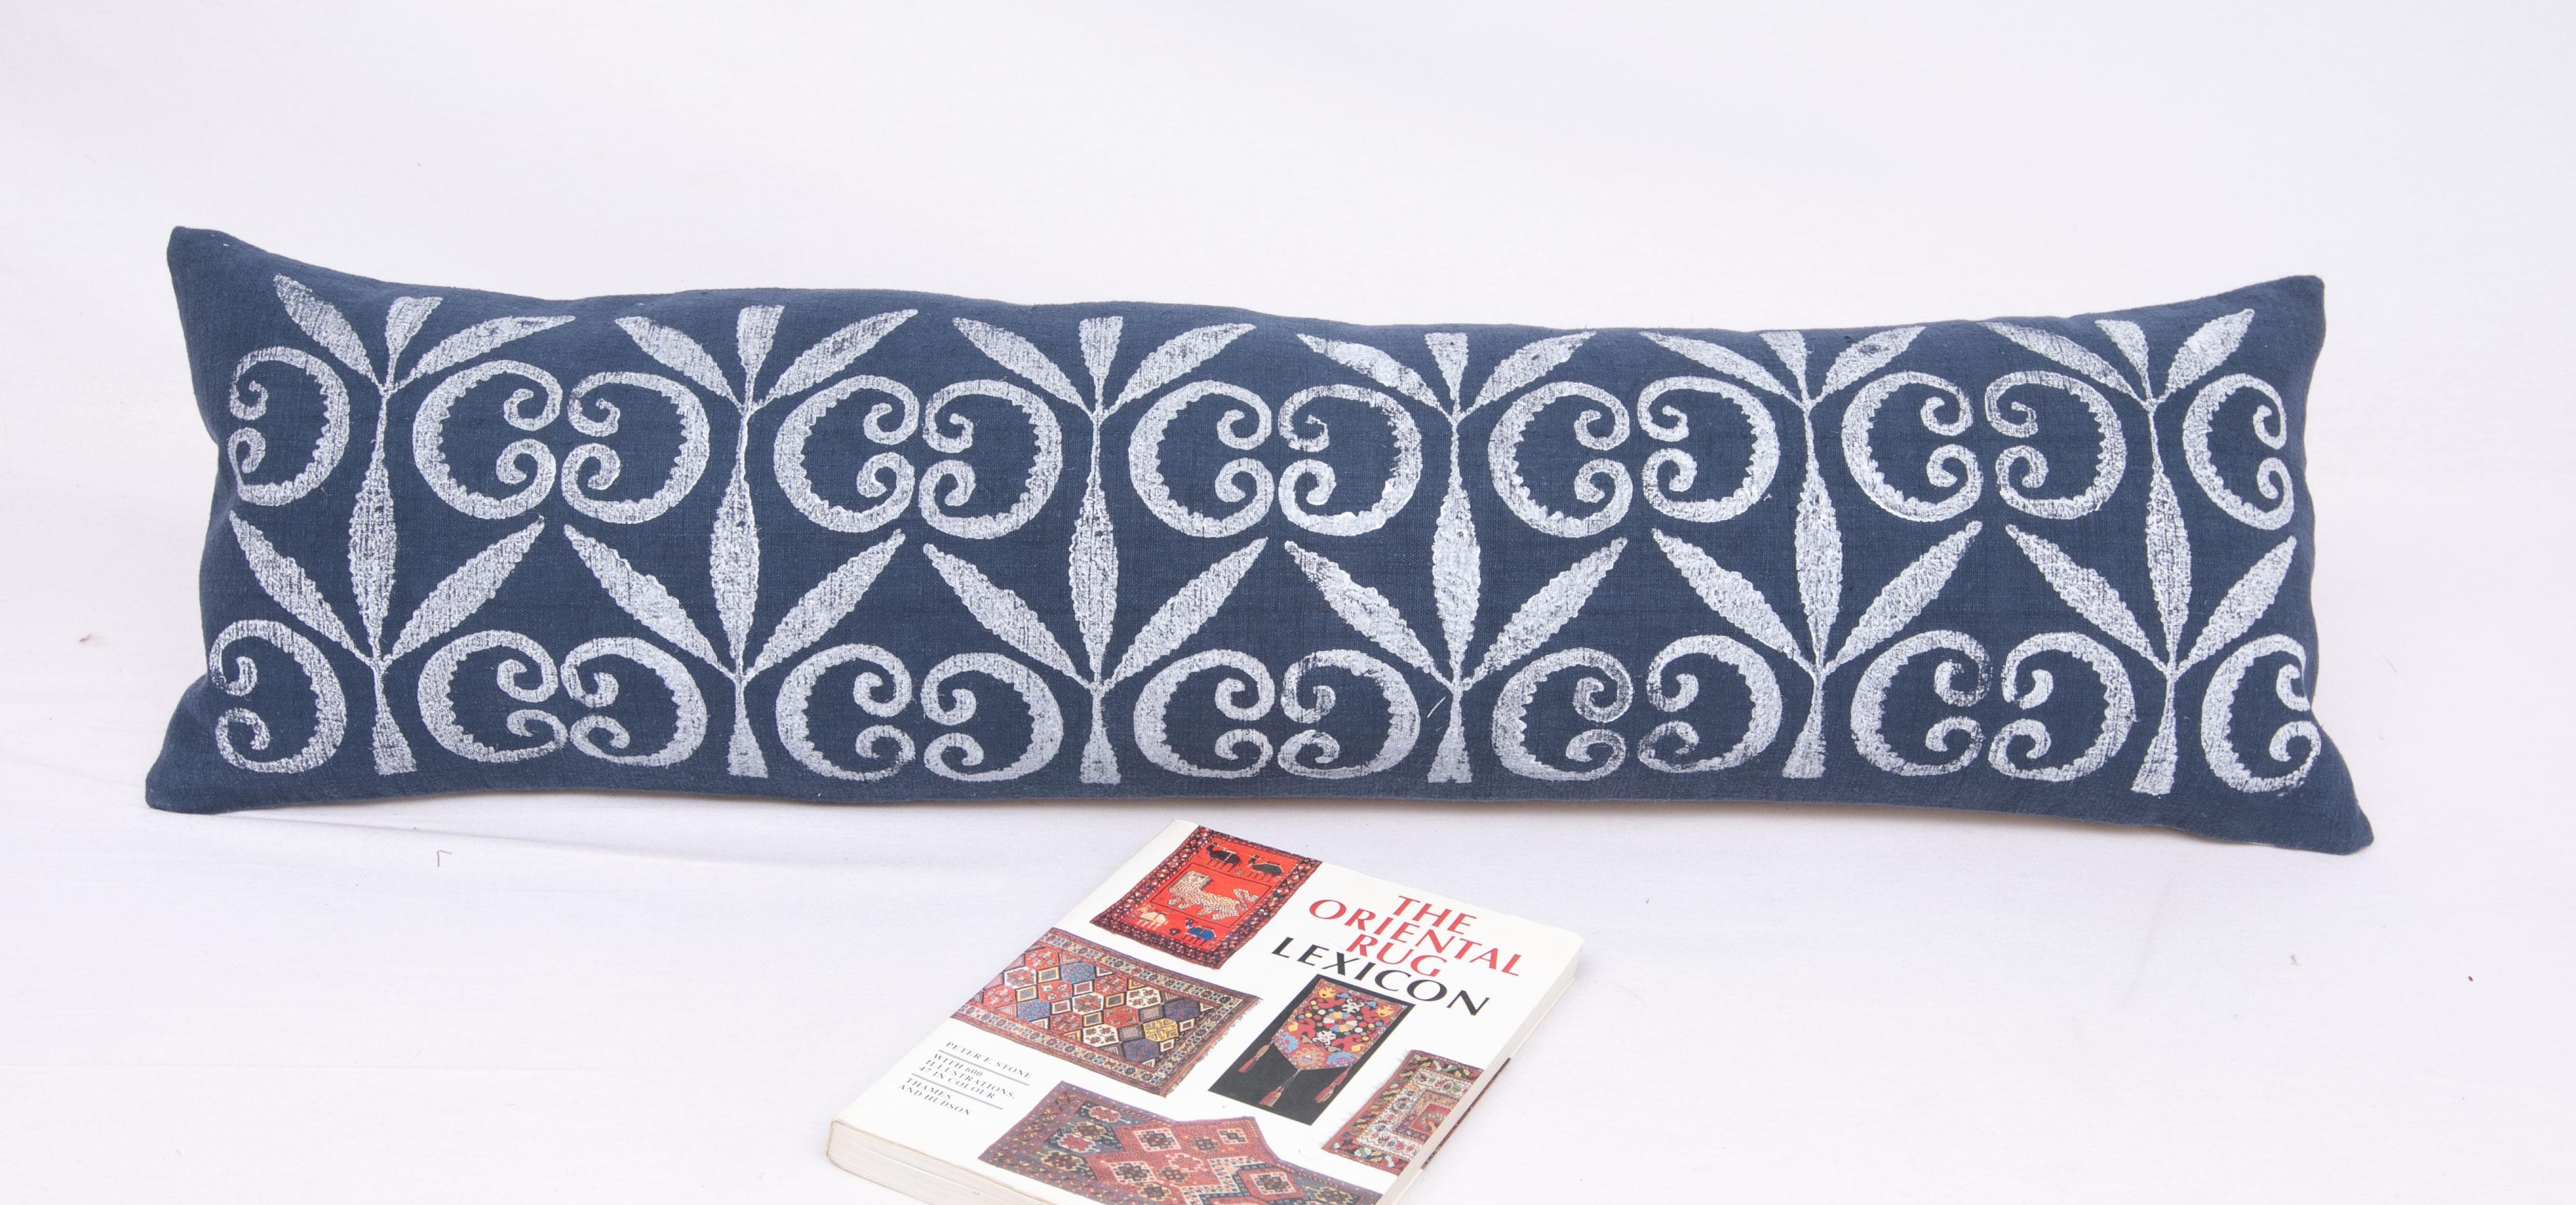 Original old Anatolian blocks used to print these patterns on to hand woven vintage cotton fabric.
It does not come with an insert but a bag made to the size to accommodate insert materials.
Cotton in the back.
Zipper closure.
Dry Clean